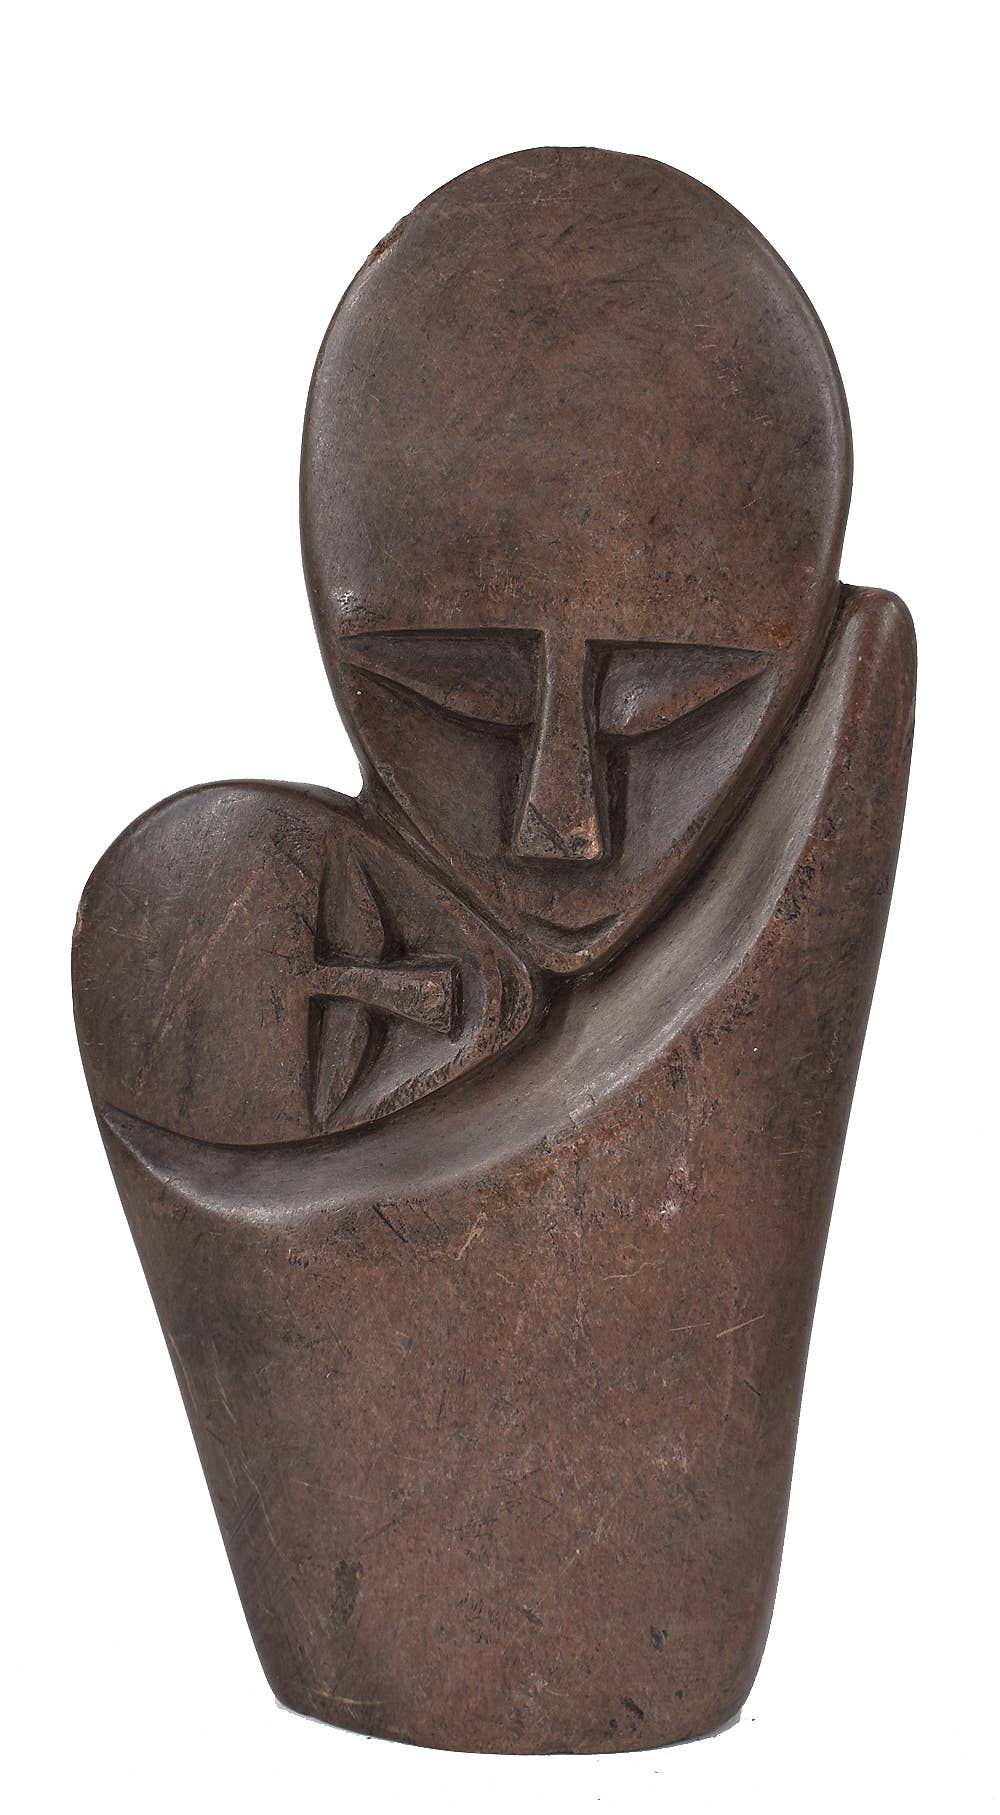 Shona Stone Mother and Child Sculpture 131713 - Africa Direct